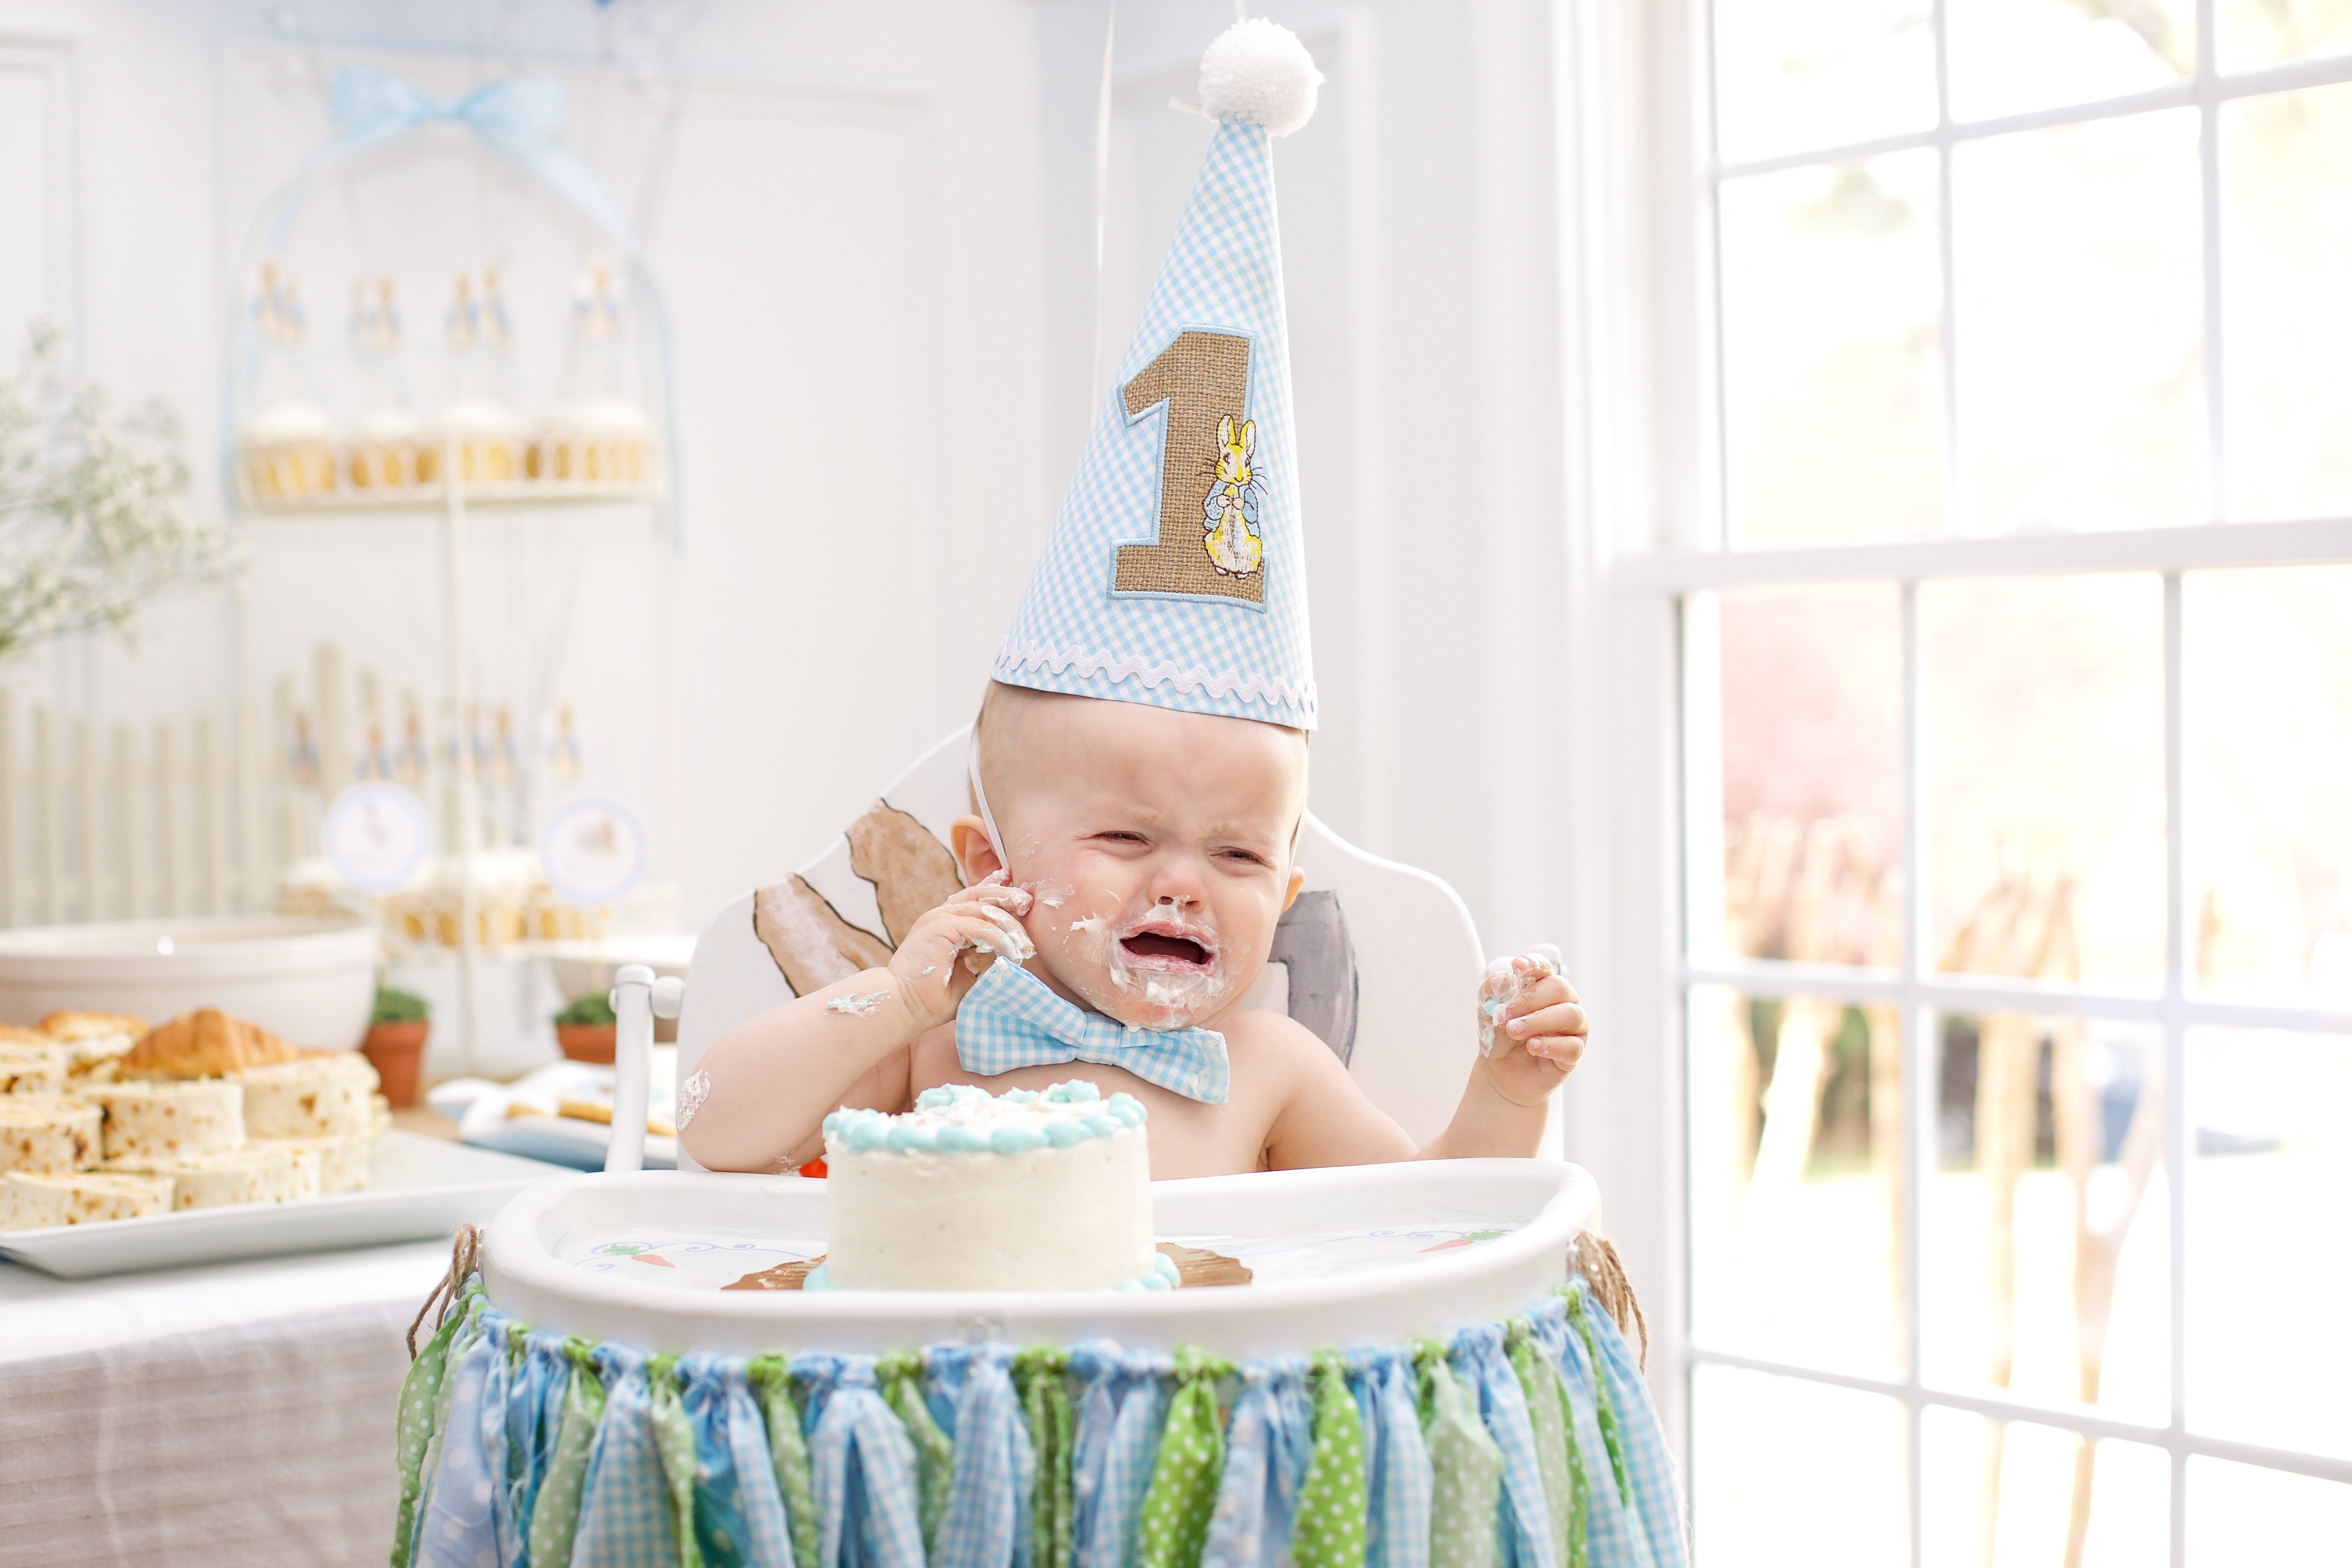 Peter Rabbit Themed First Birthday Party - Home and Hallow